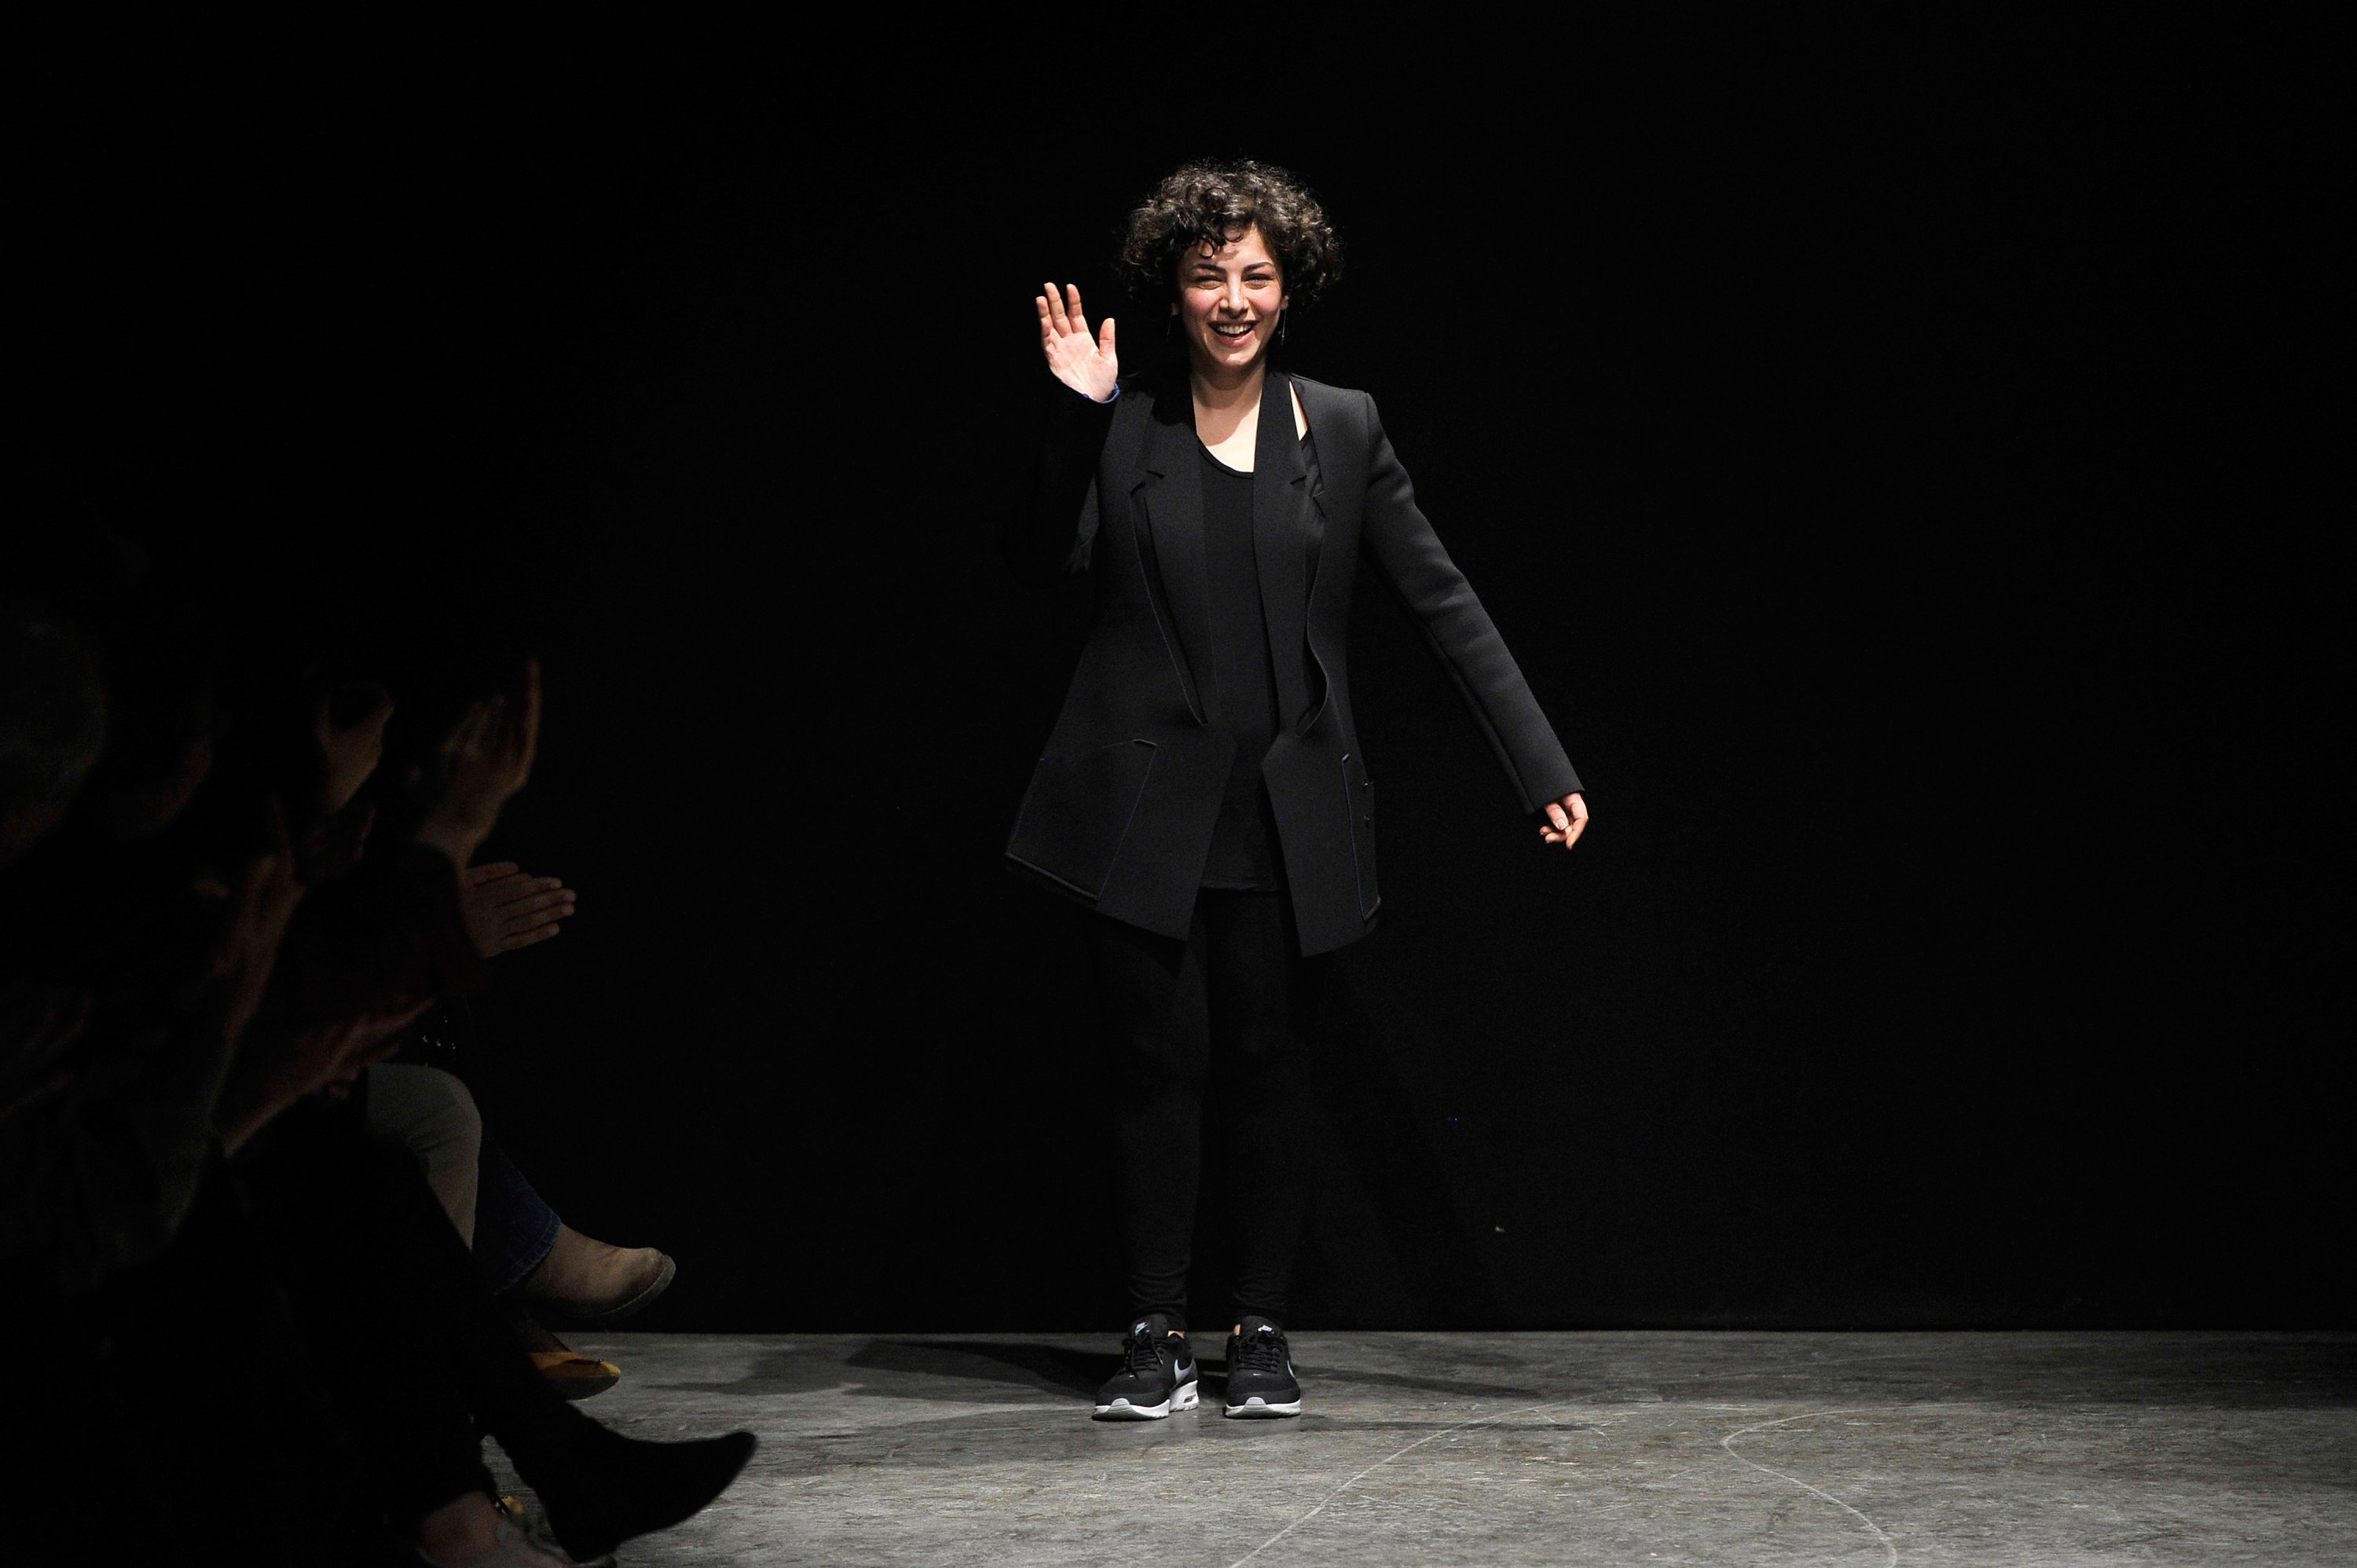 Fashion designer Özlem Kaya appears at the end of the runway following the Özlem Kaya show during MBFWI presented by American Express Fall/Winter 2014 on March 15, 2014 in Istanbul, Turkey.  (Getty Images for IMG)